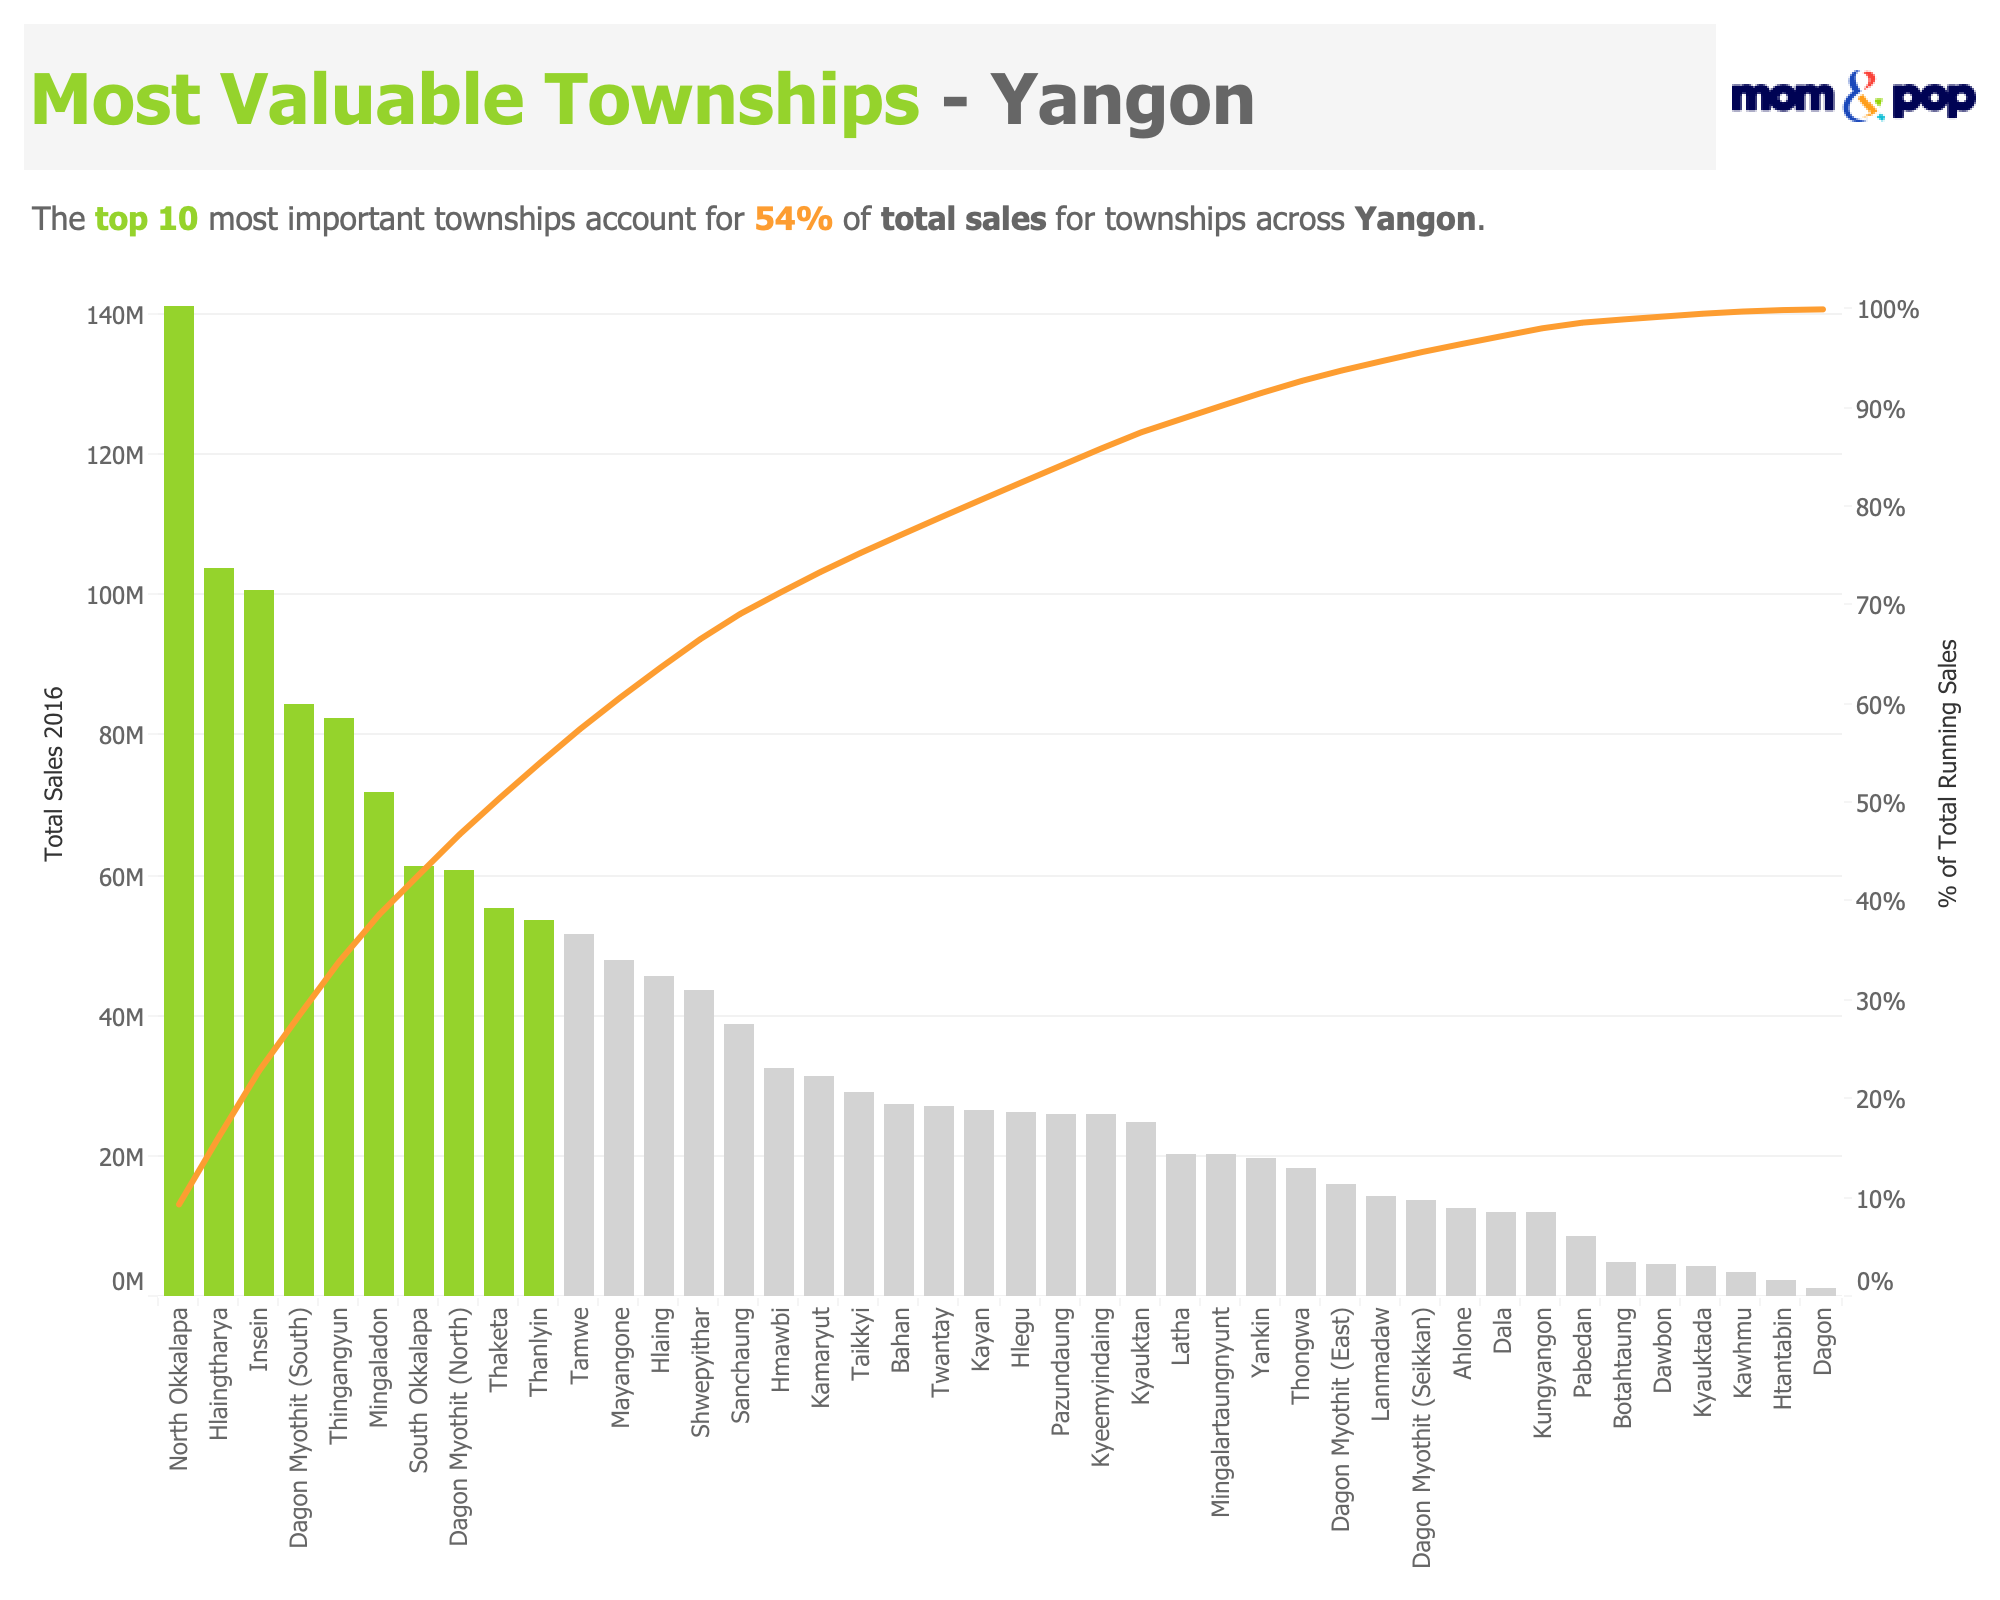 Pareto Chart shows most valuable townships by % of total sales.